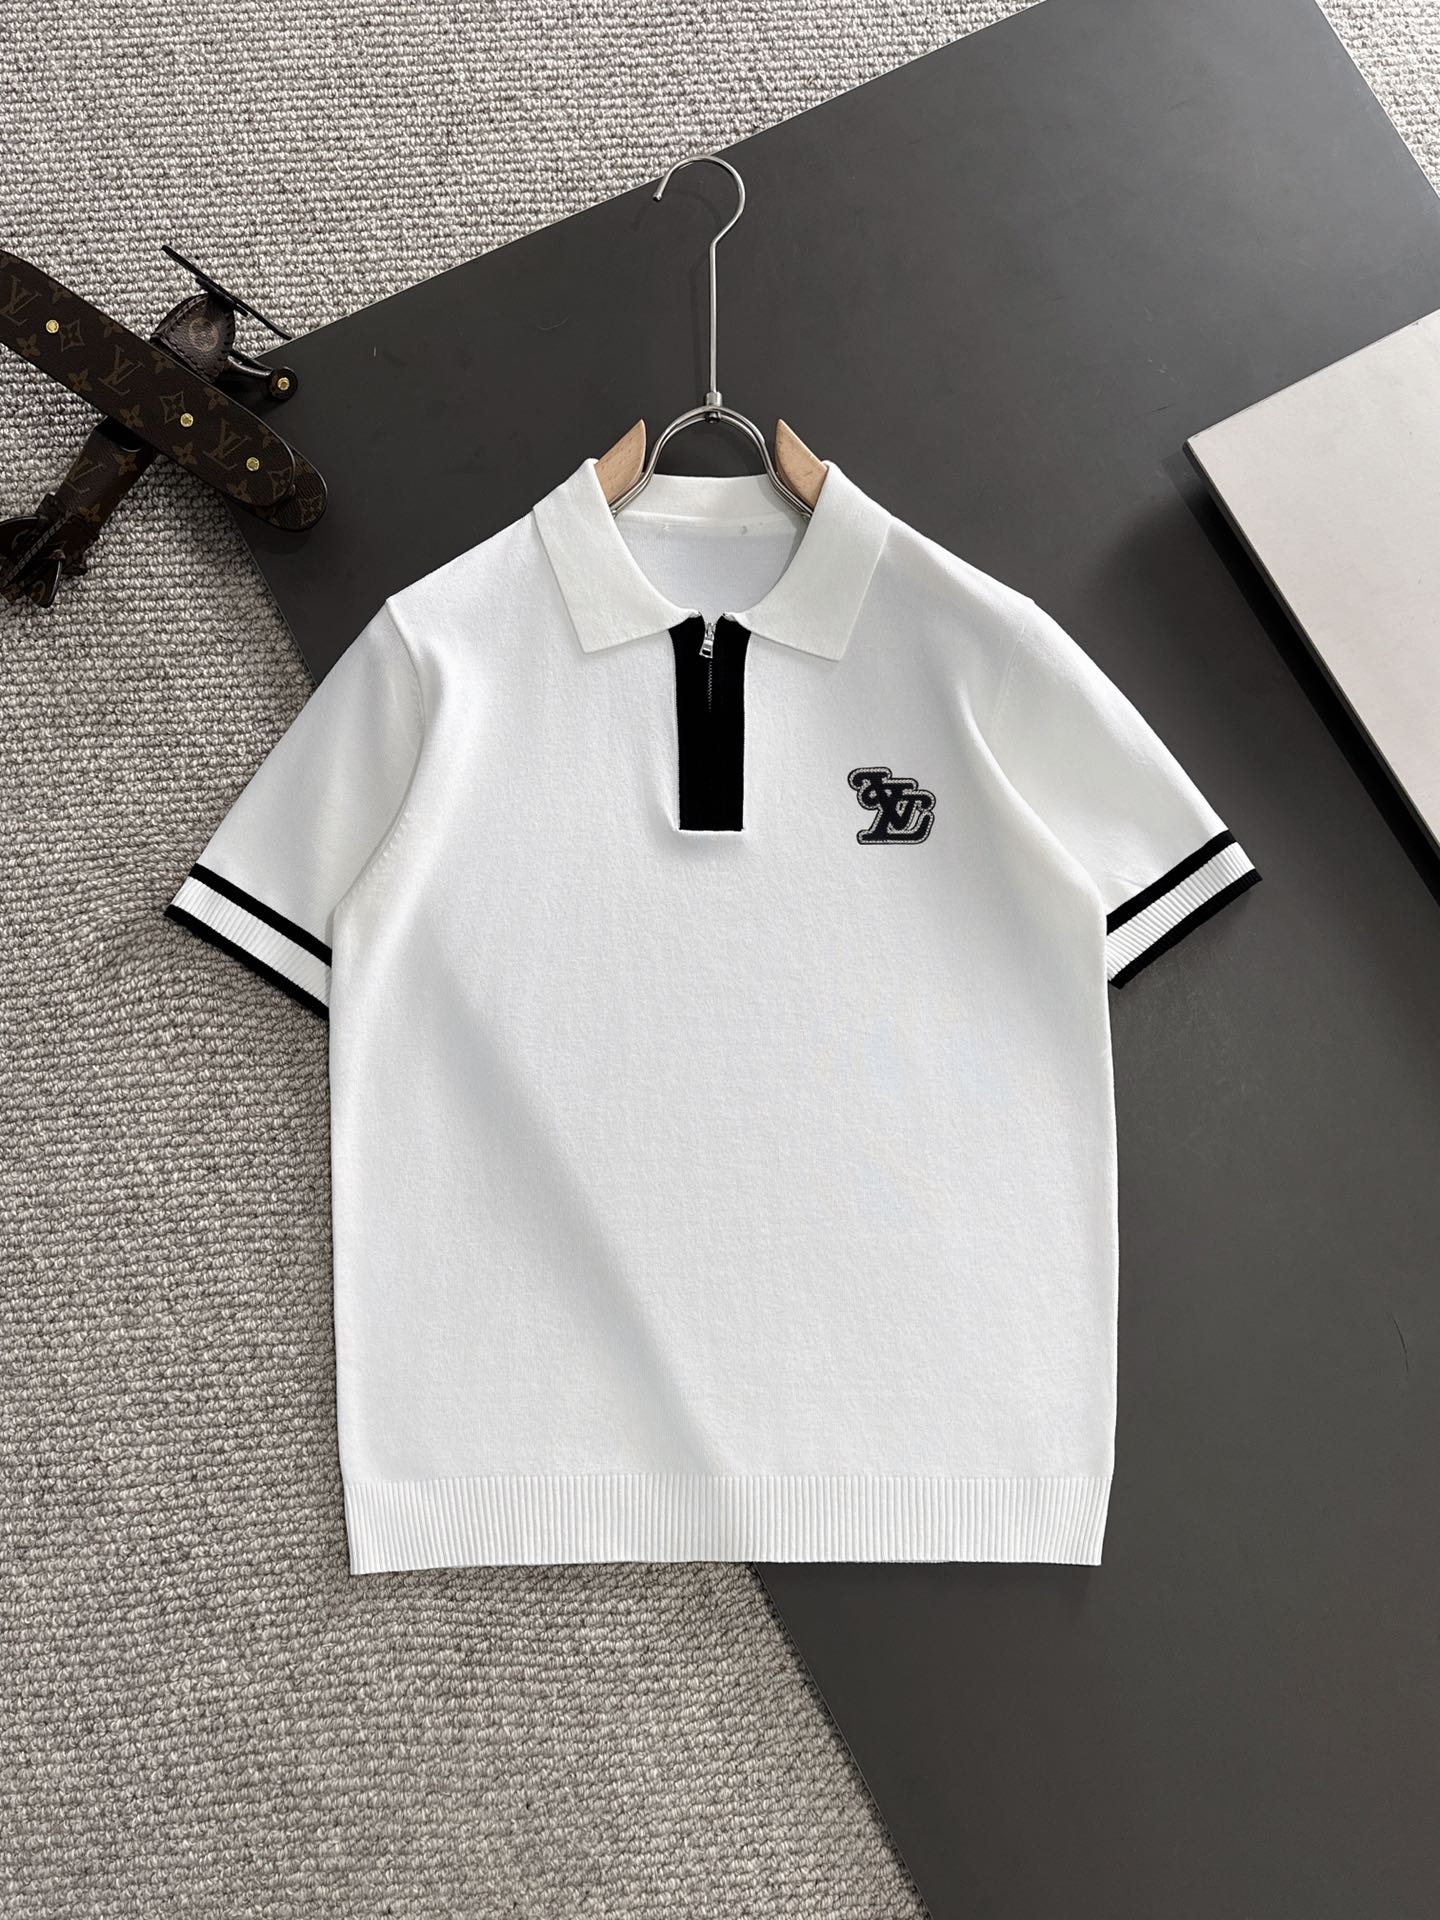 Louis Vuitton Clothing T-Shirt Embroidery Men Combed Cotton Knitting Spring/Summer Collection Short Sleeve